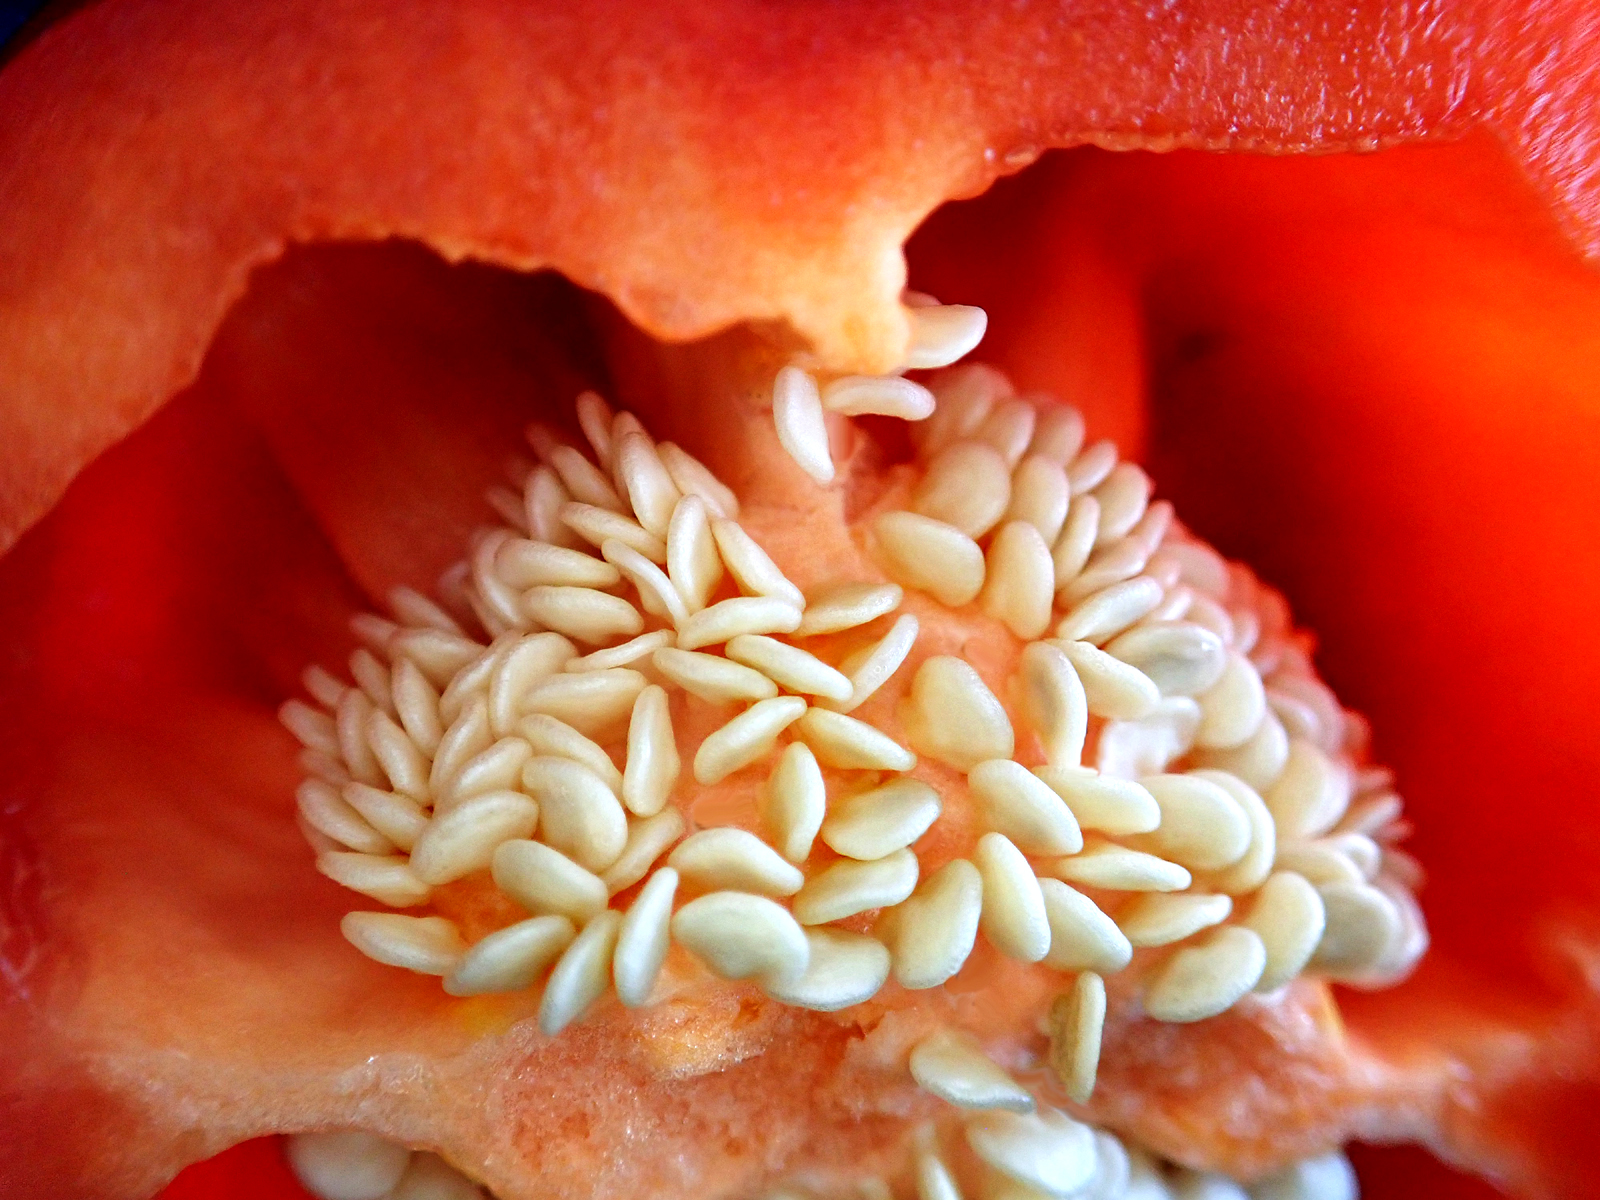 seed saving getting something for nothing image of the inside of a red bell pepper showing the seeds